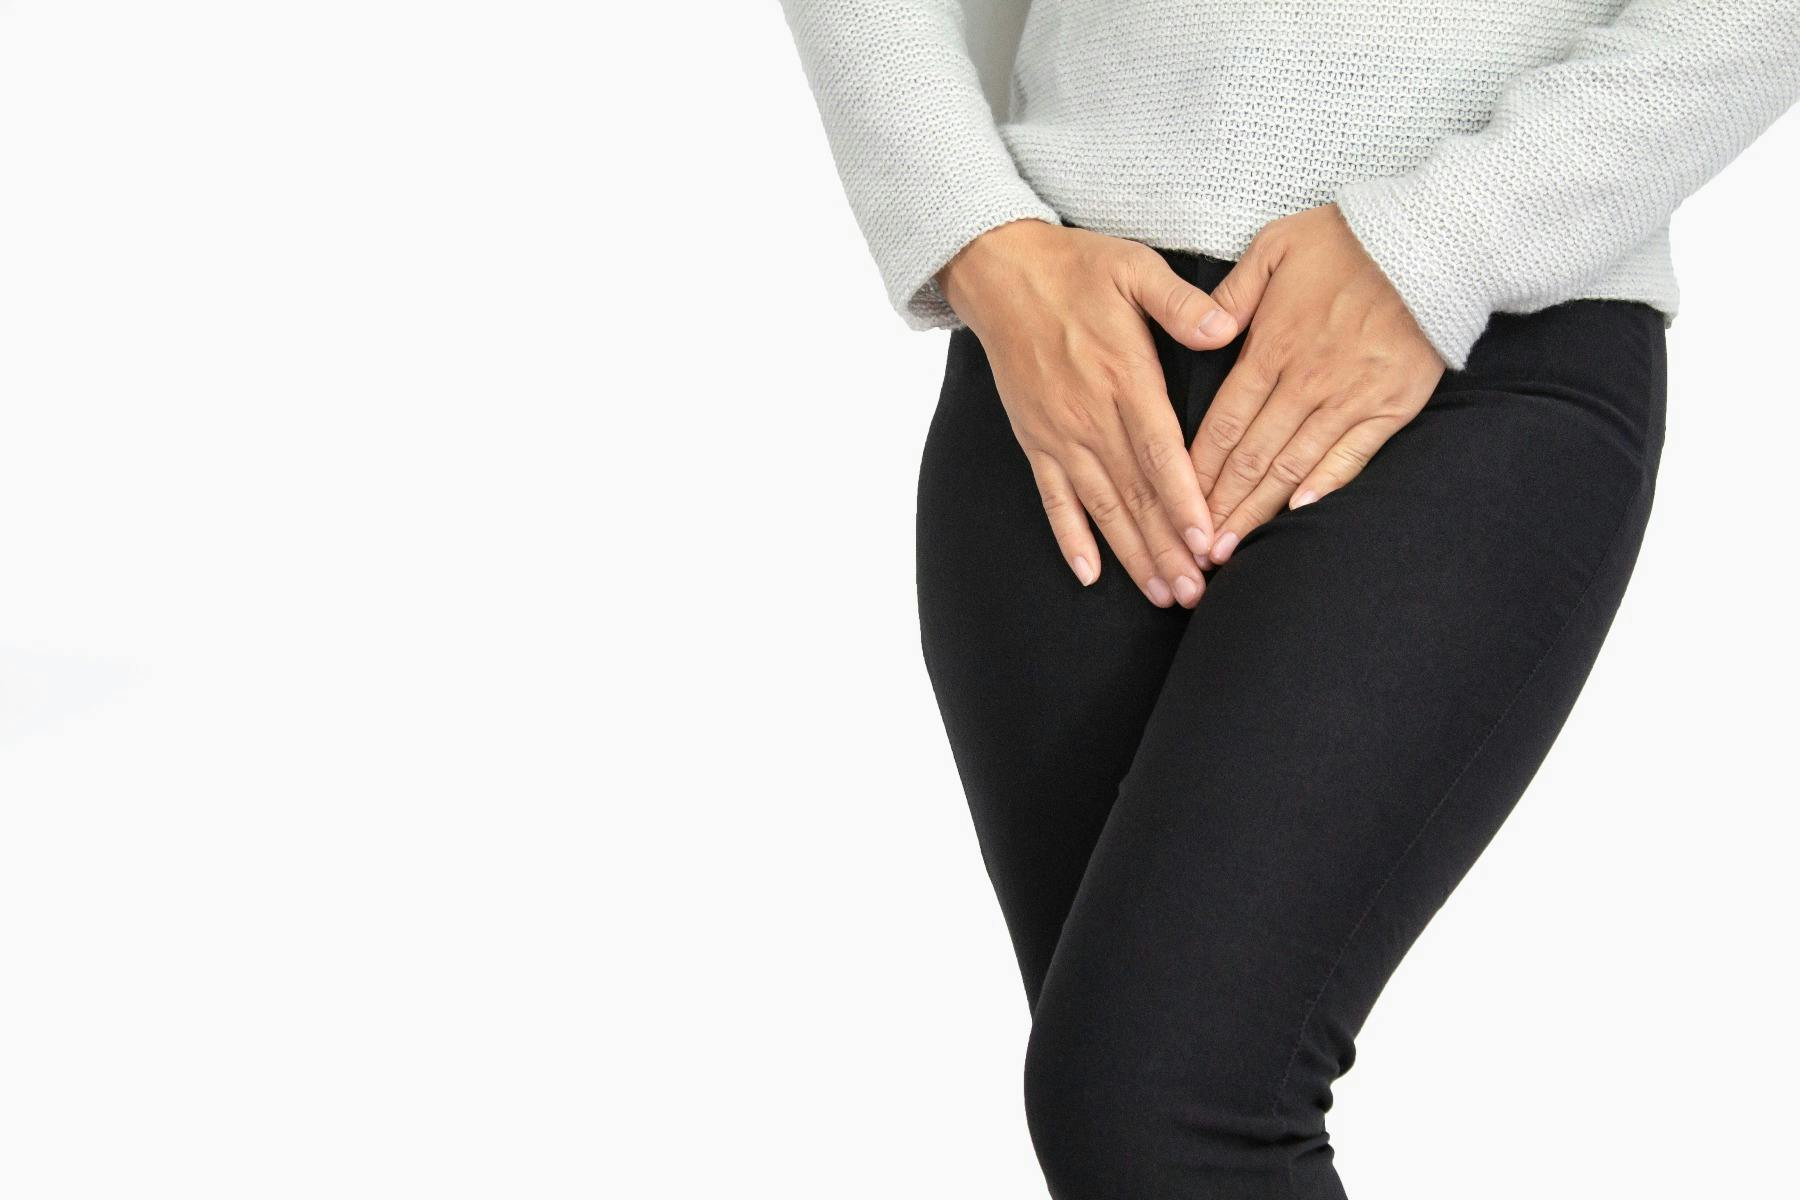 A woman covering her groin with her hands.